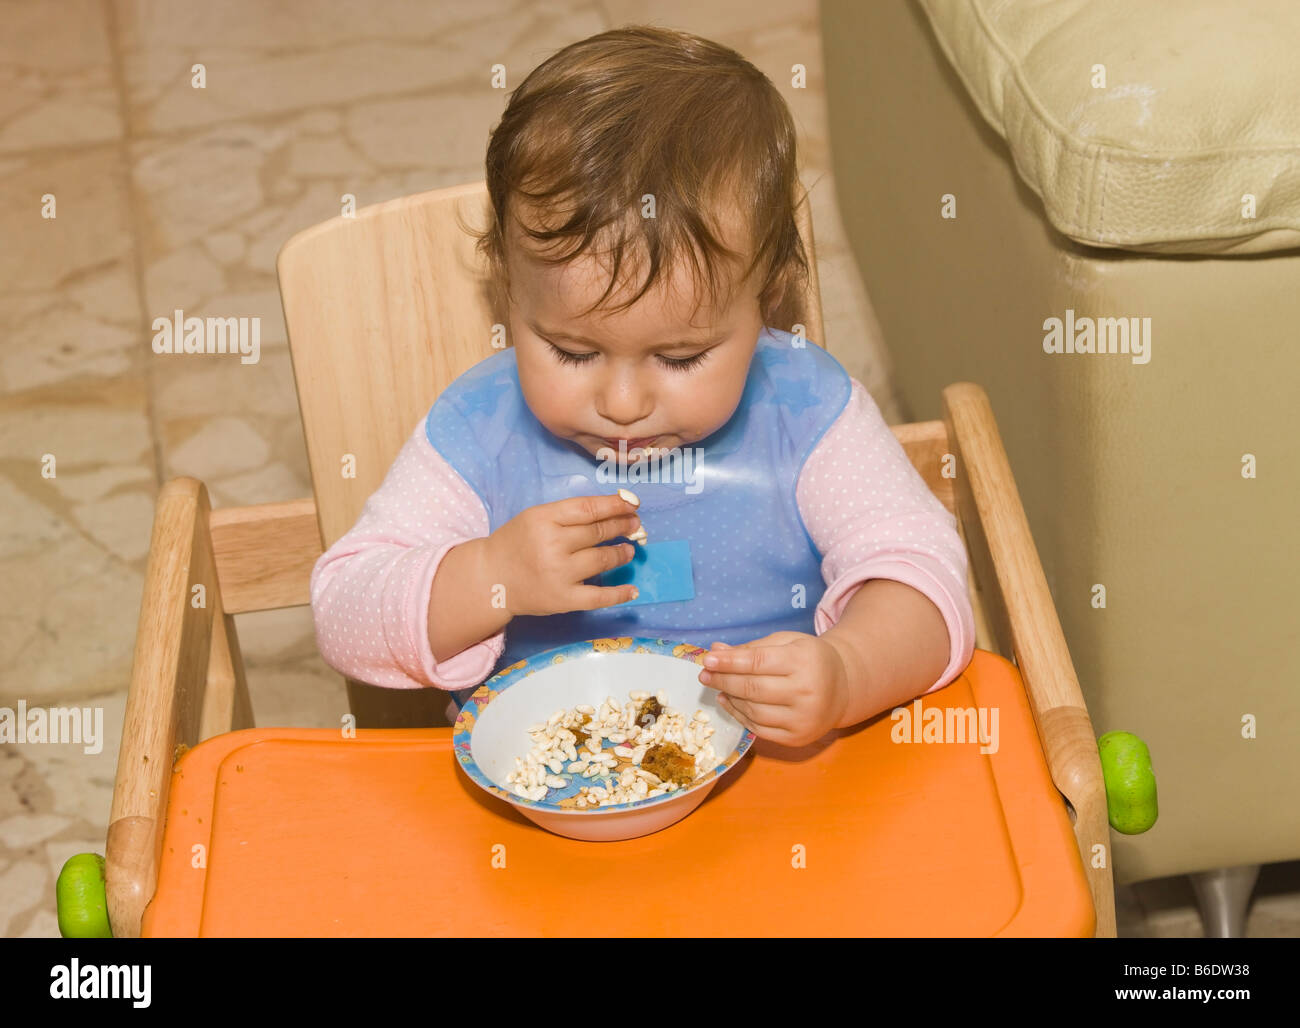 One year old toddler feeding herself Stock Photo